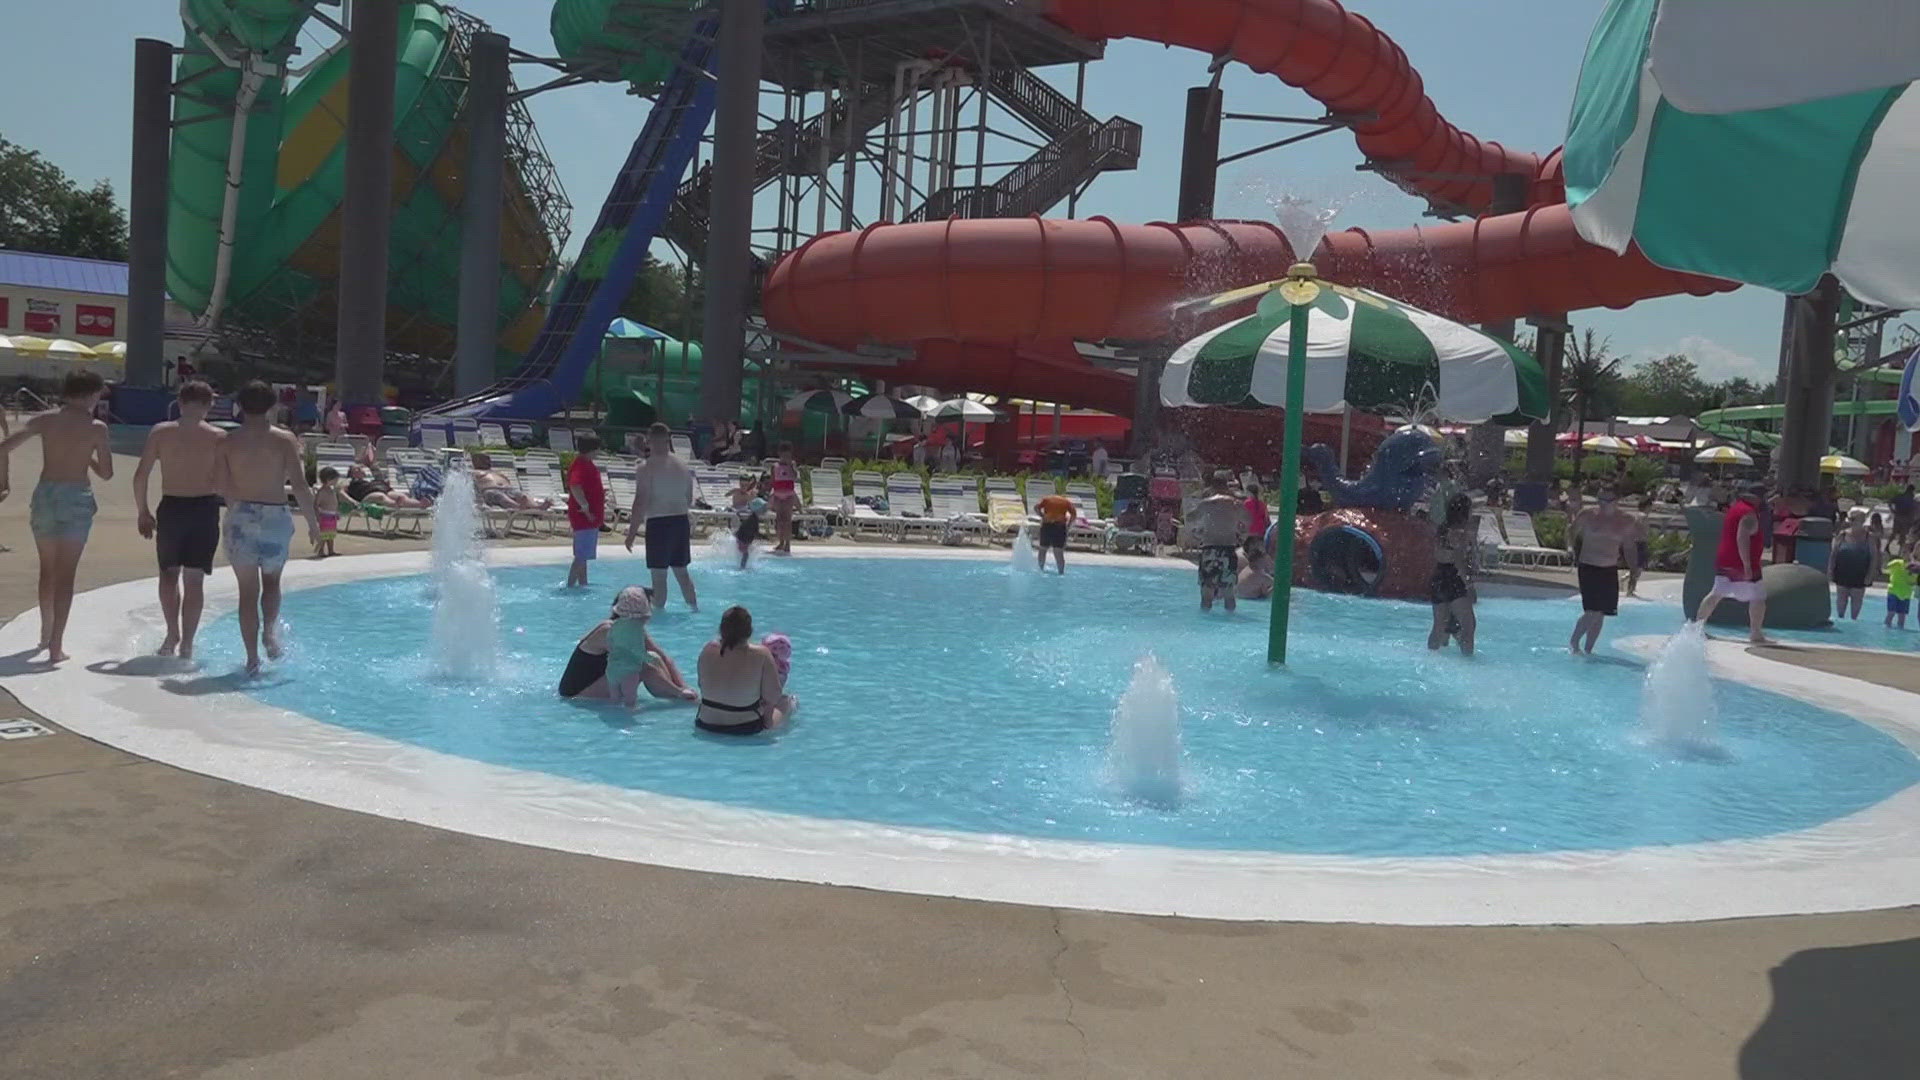 Funtown Splashtown in Saco anticipates heavy foot traffic, while a Cumberland golf center expects the opposite.